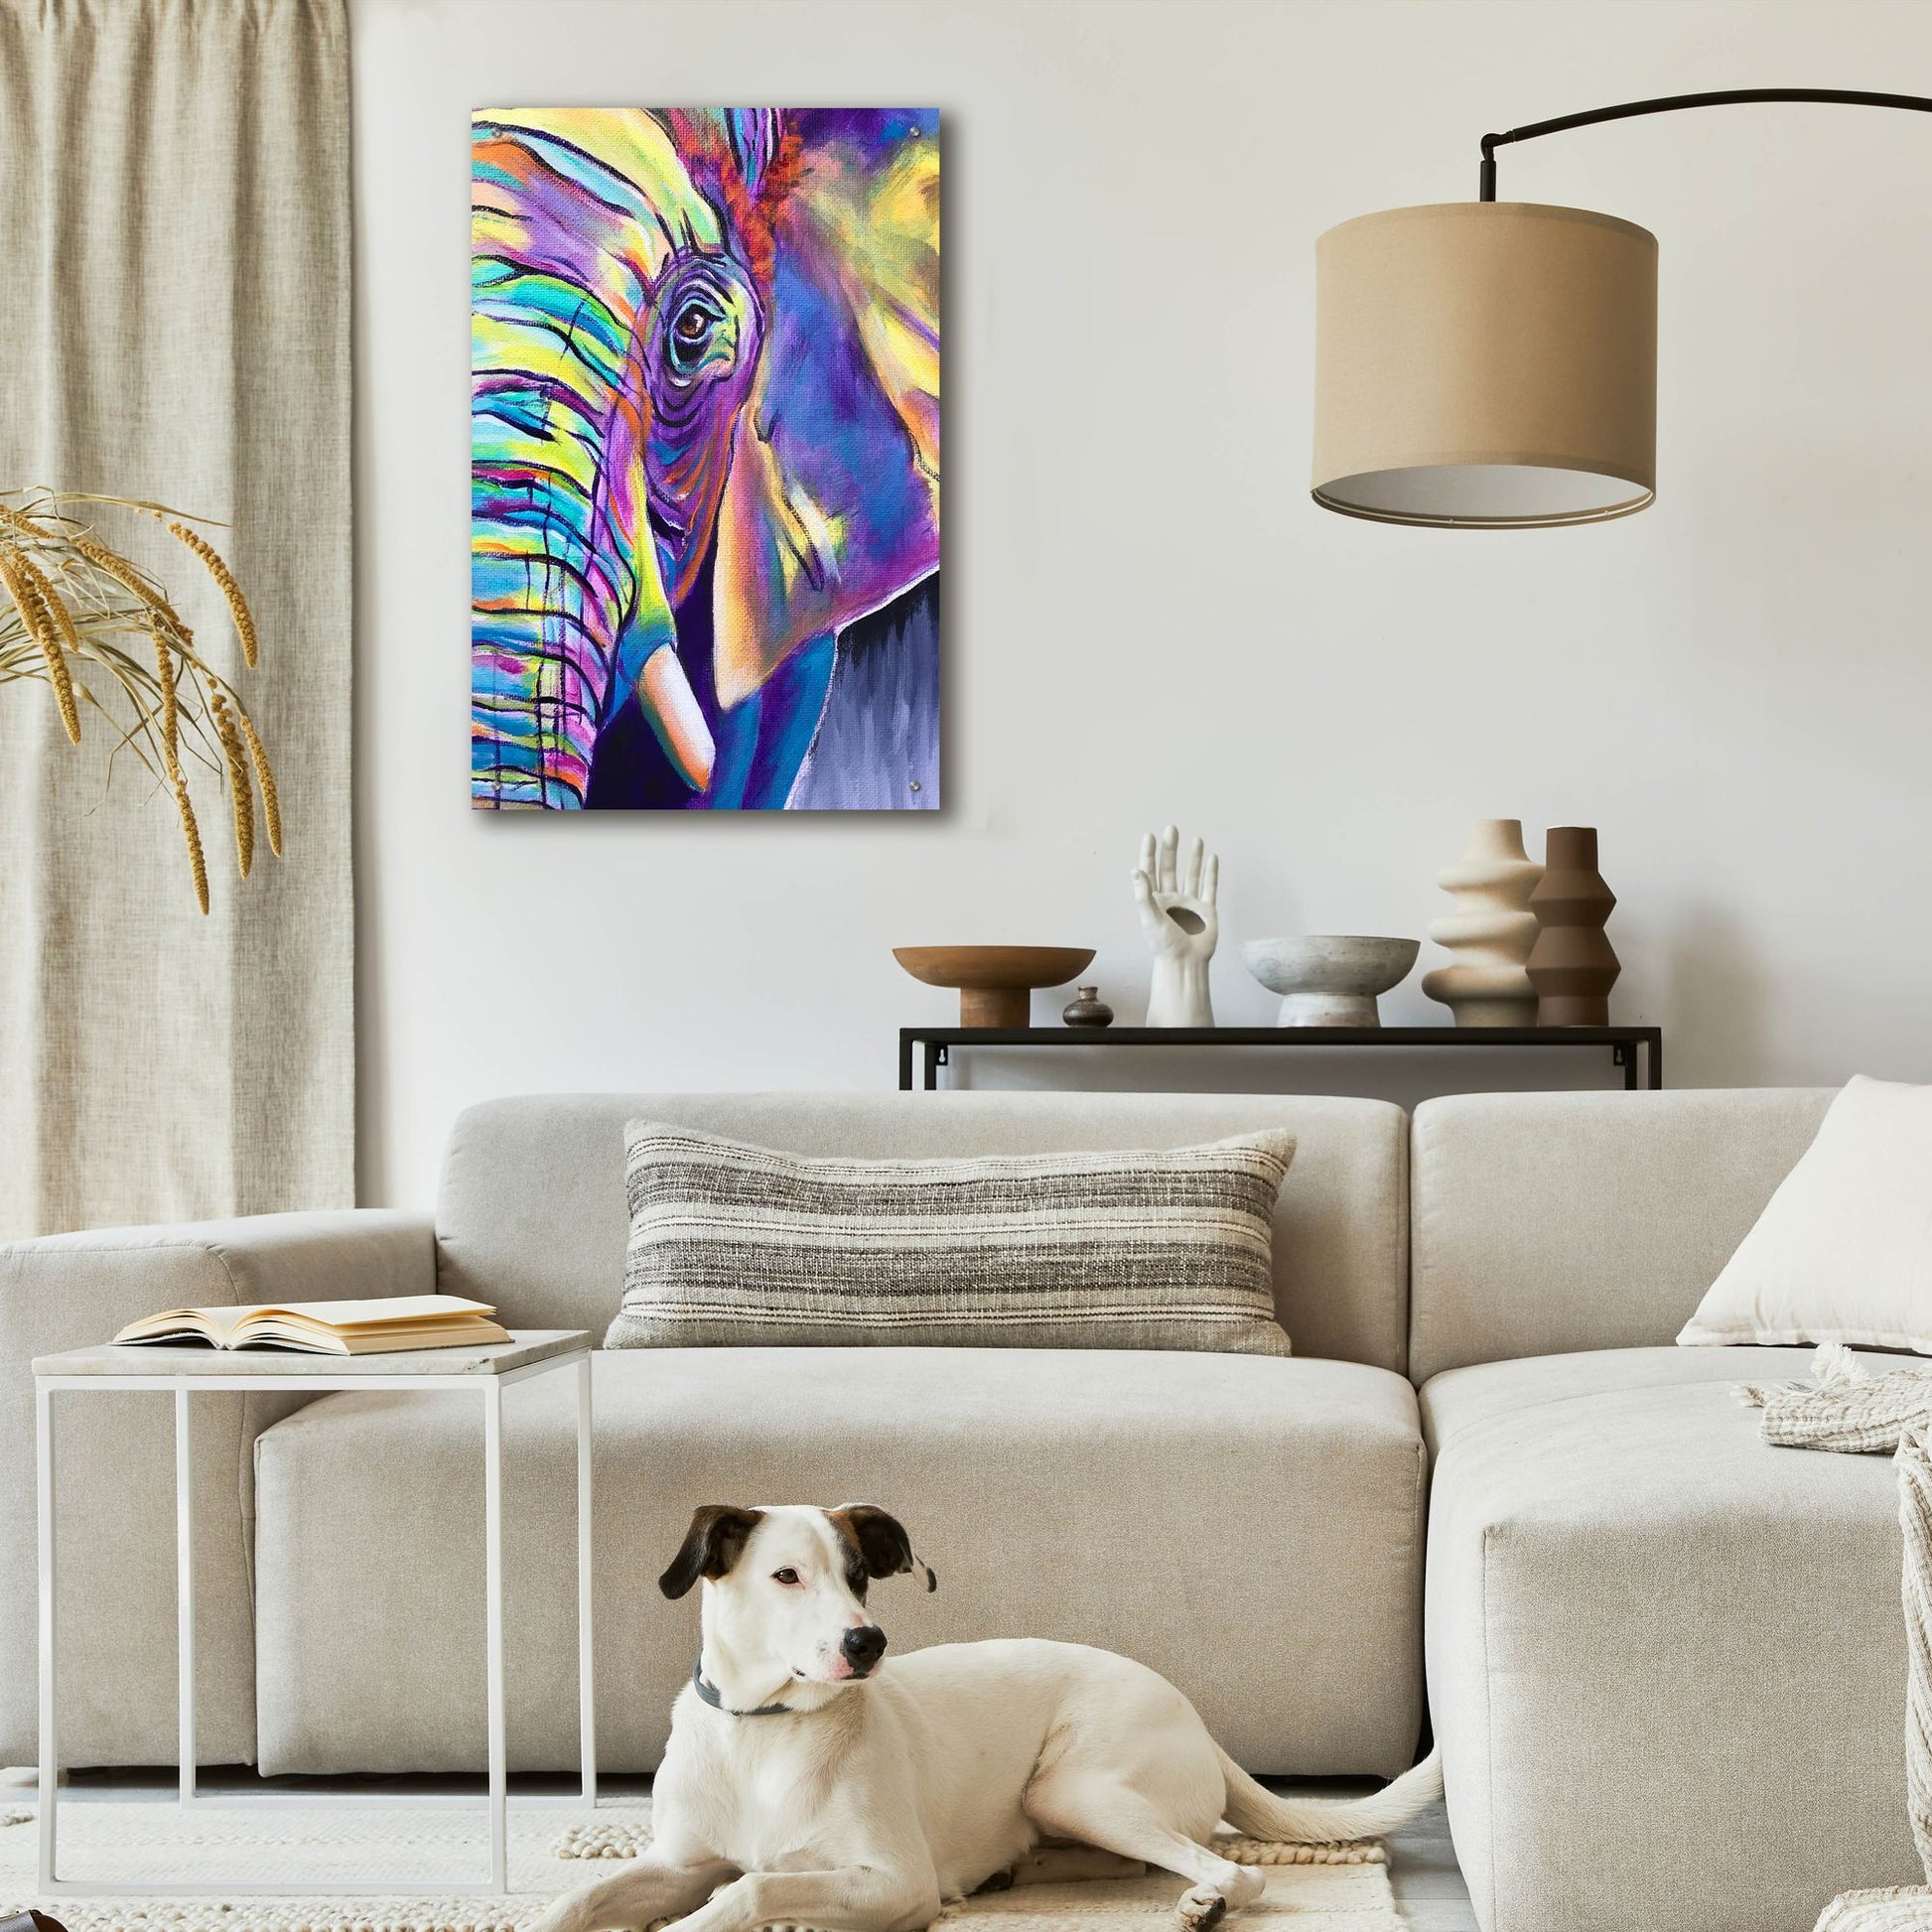 Epic Art 'Elephant - Butterfly Right2 by Dawg Painter, Acrylic Glass Wall Art,24x36